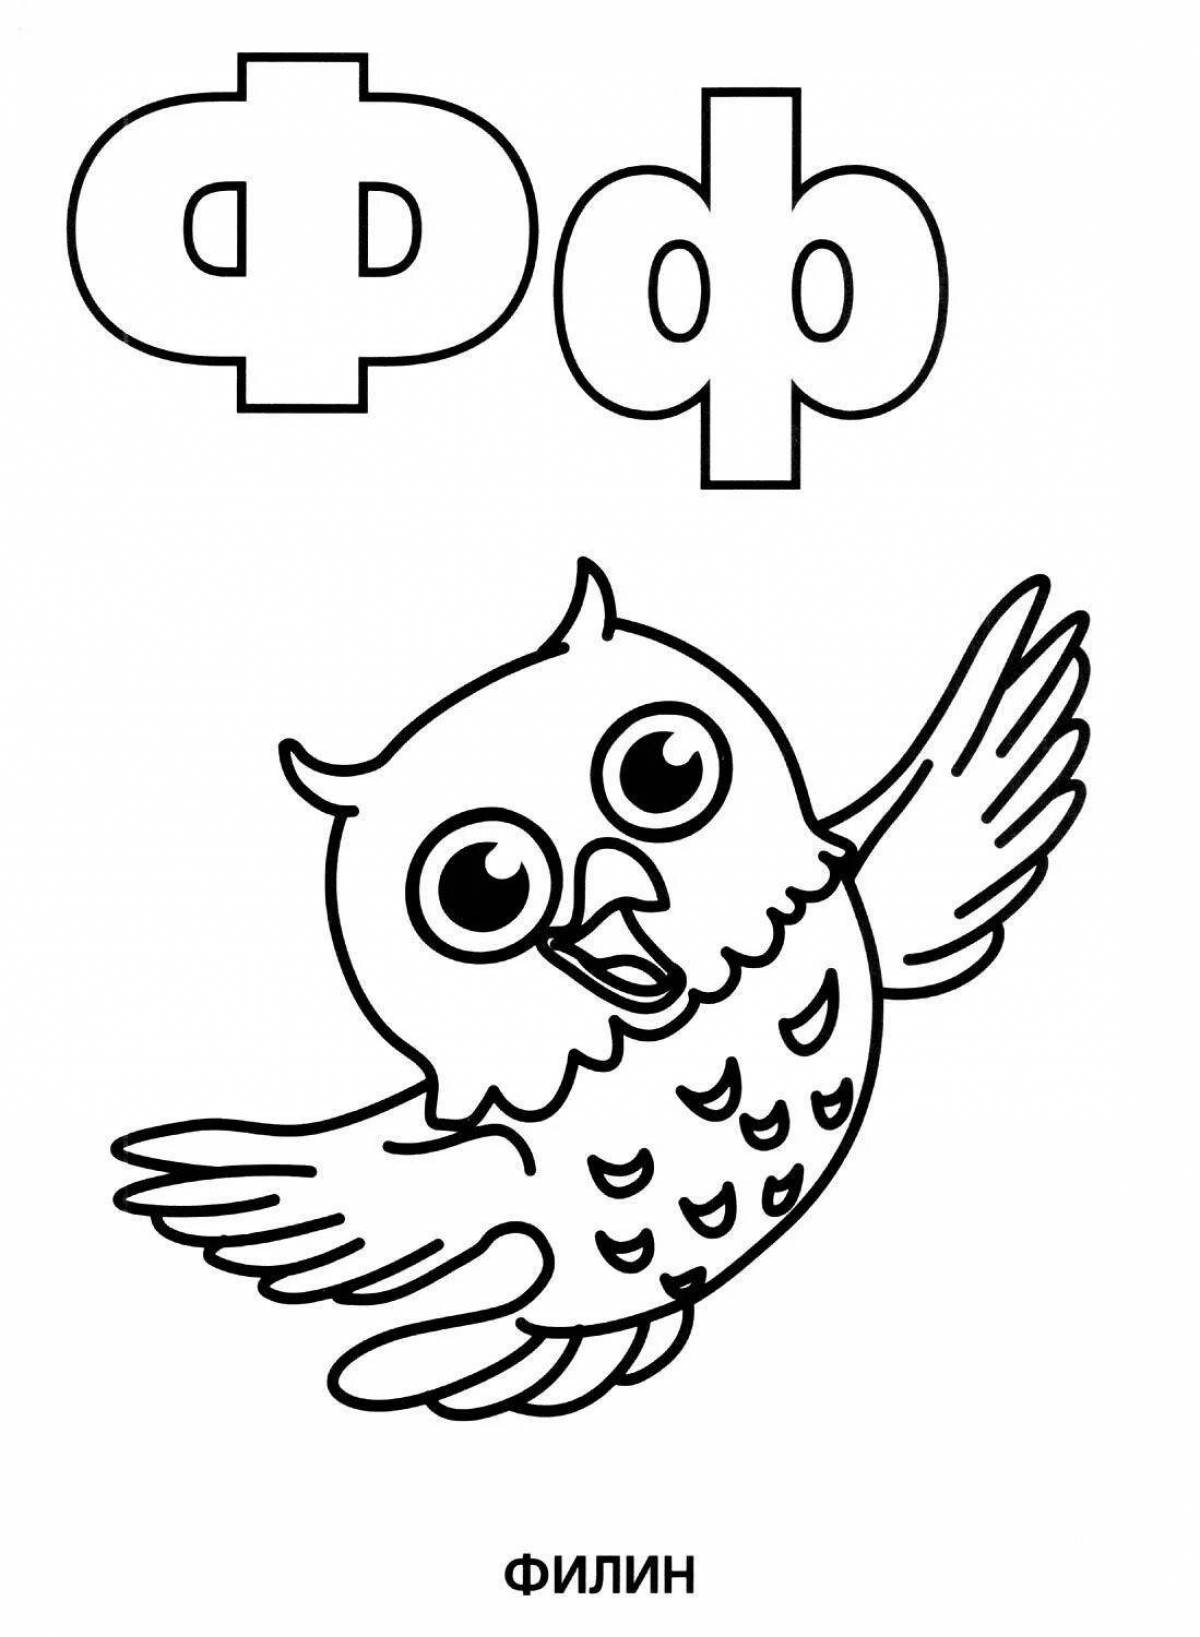 Fun letter f coloring book for kids